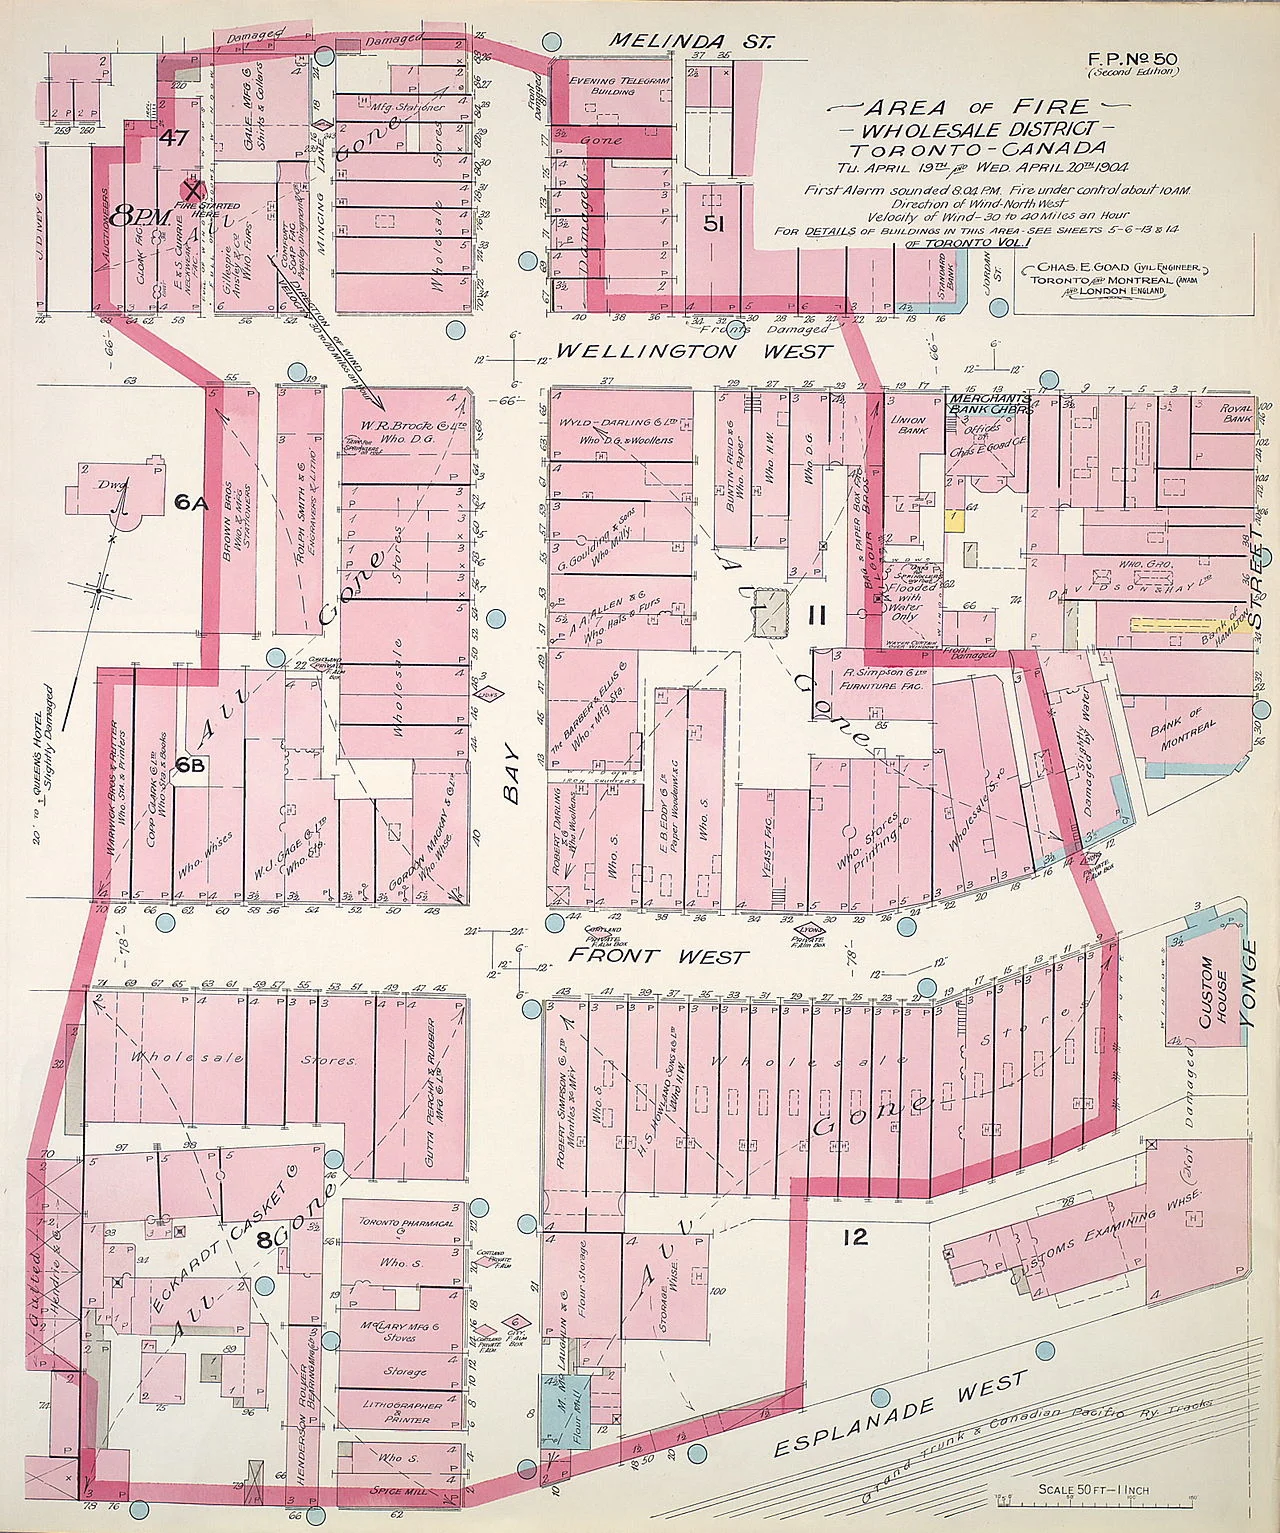 Area of Great Toronto Fire of 1904 showing the Wholesale district affected (MAPS-R-71)